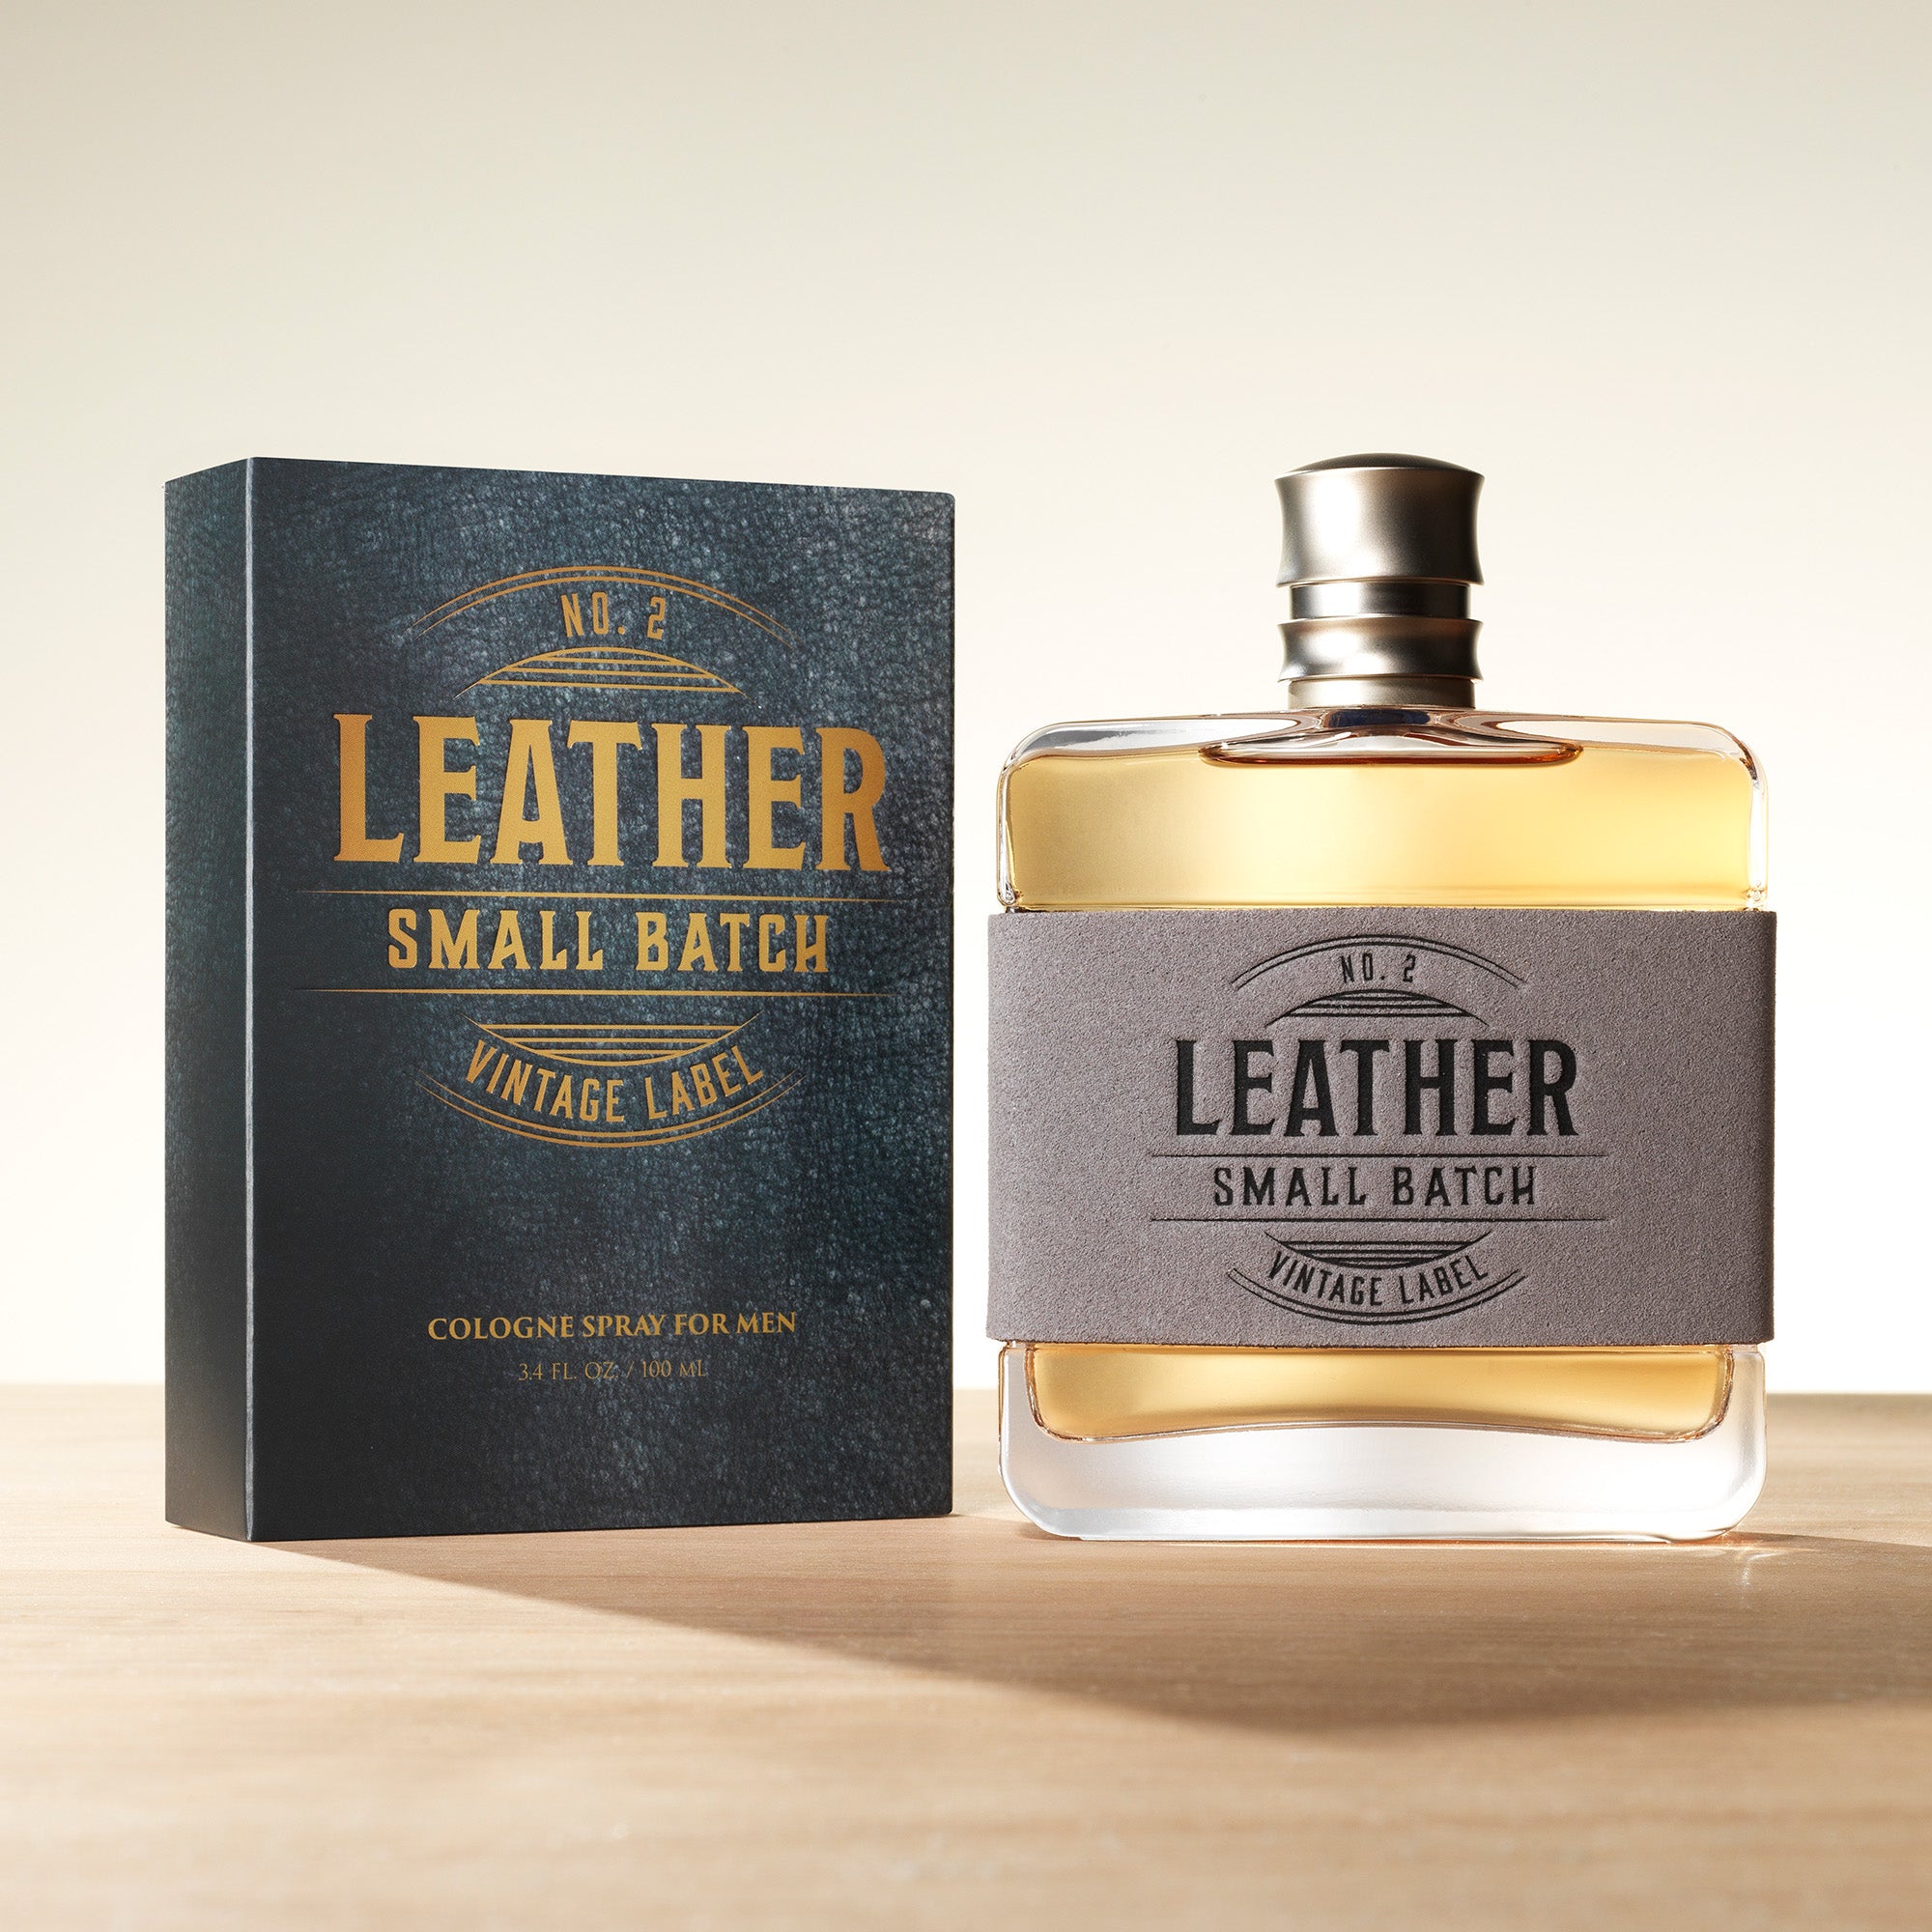 ENGLISH LEATHER BY ENGLISH LEATHER 8.0 OZ COLOGNE AUTHENTIC SPLASH FOR MEN